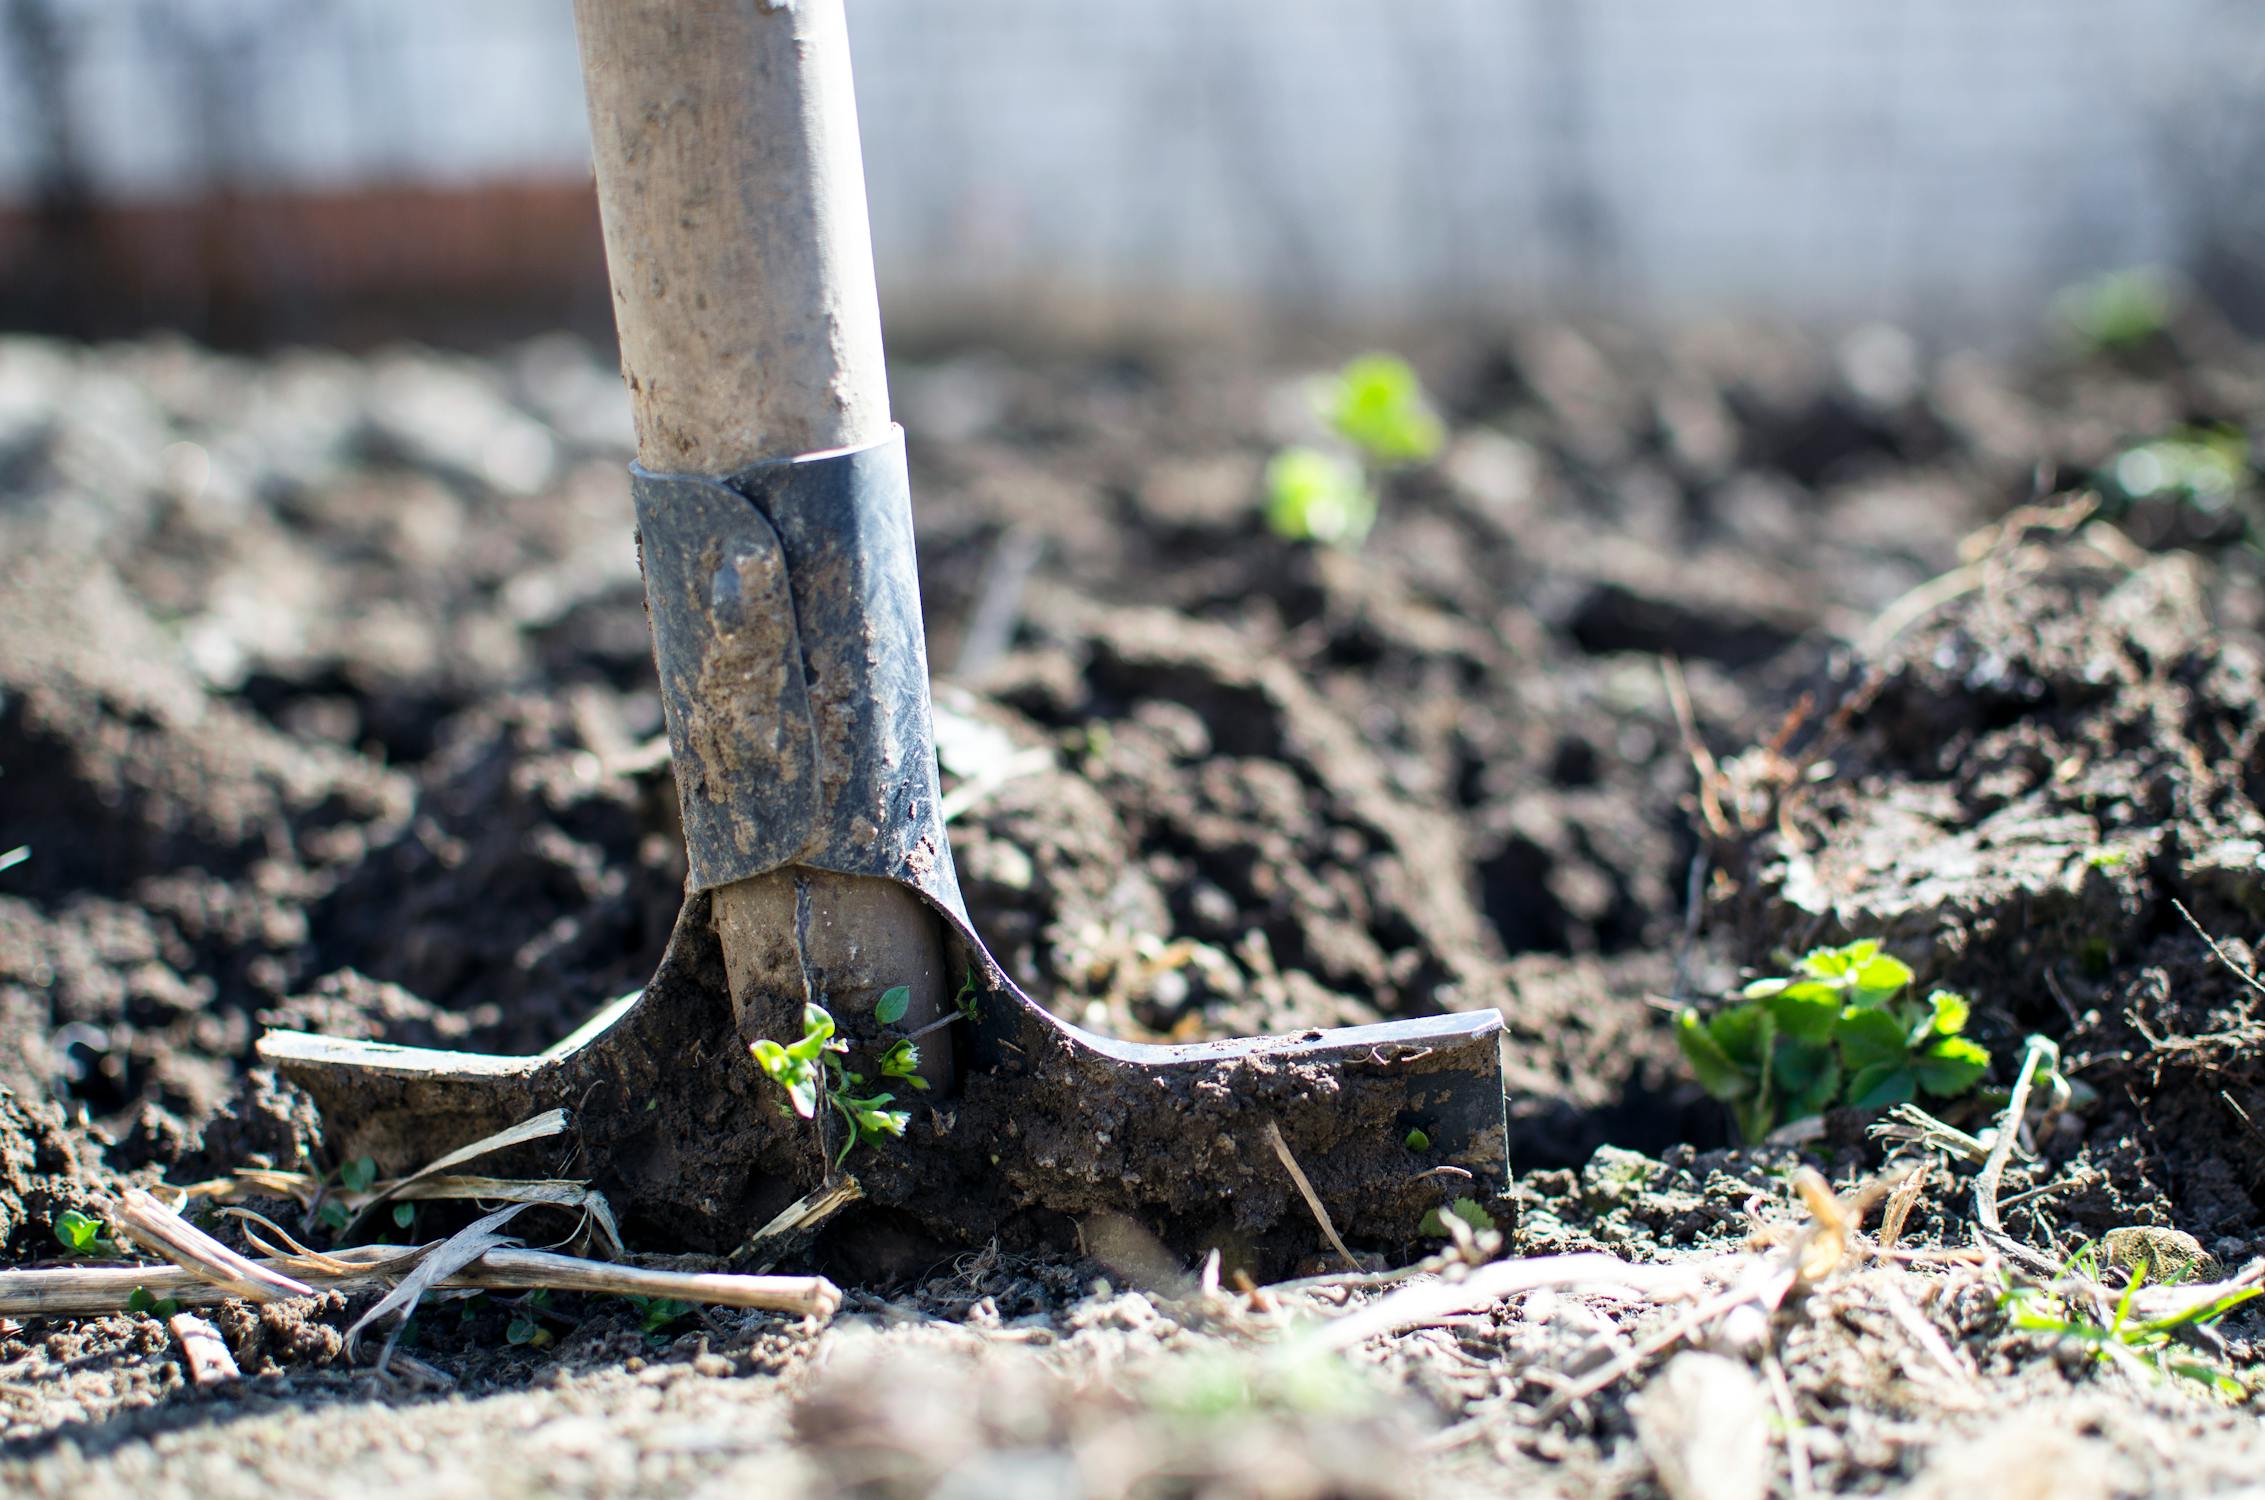 A close-up image of a shovel inserted into a crop filled with sprouts.